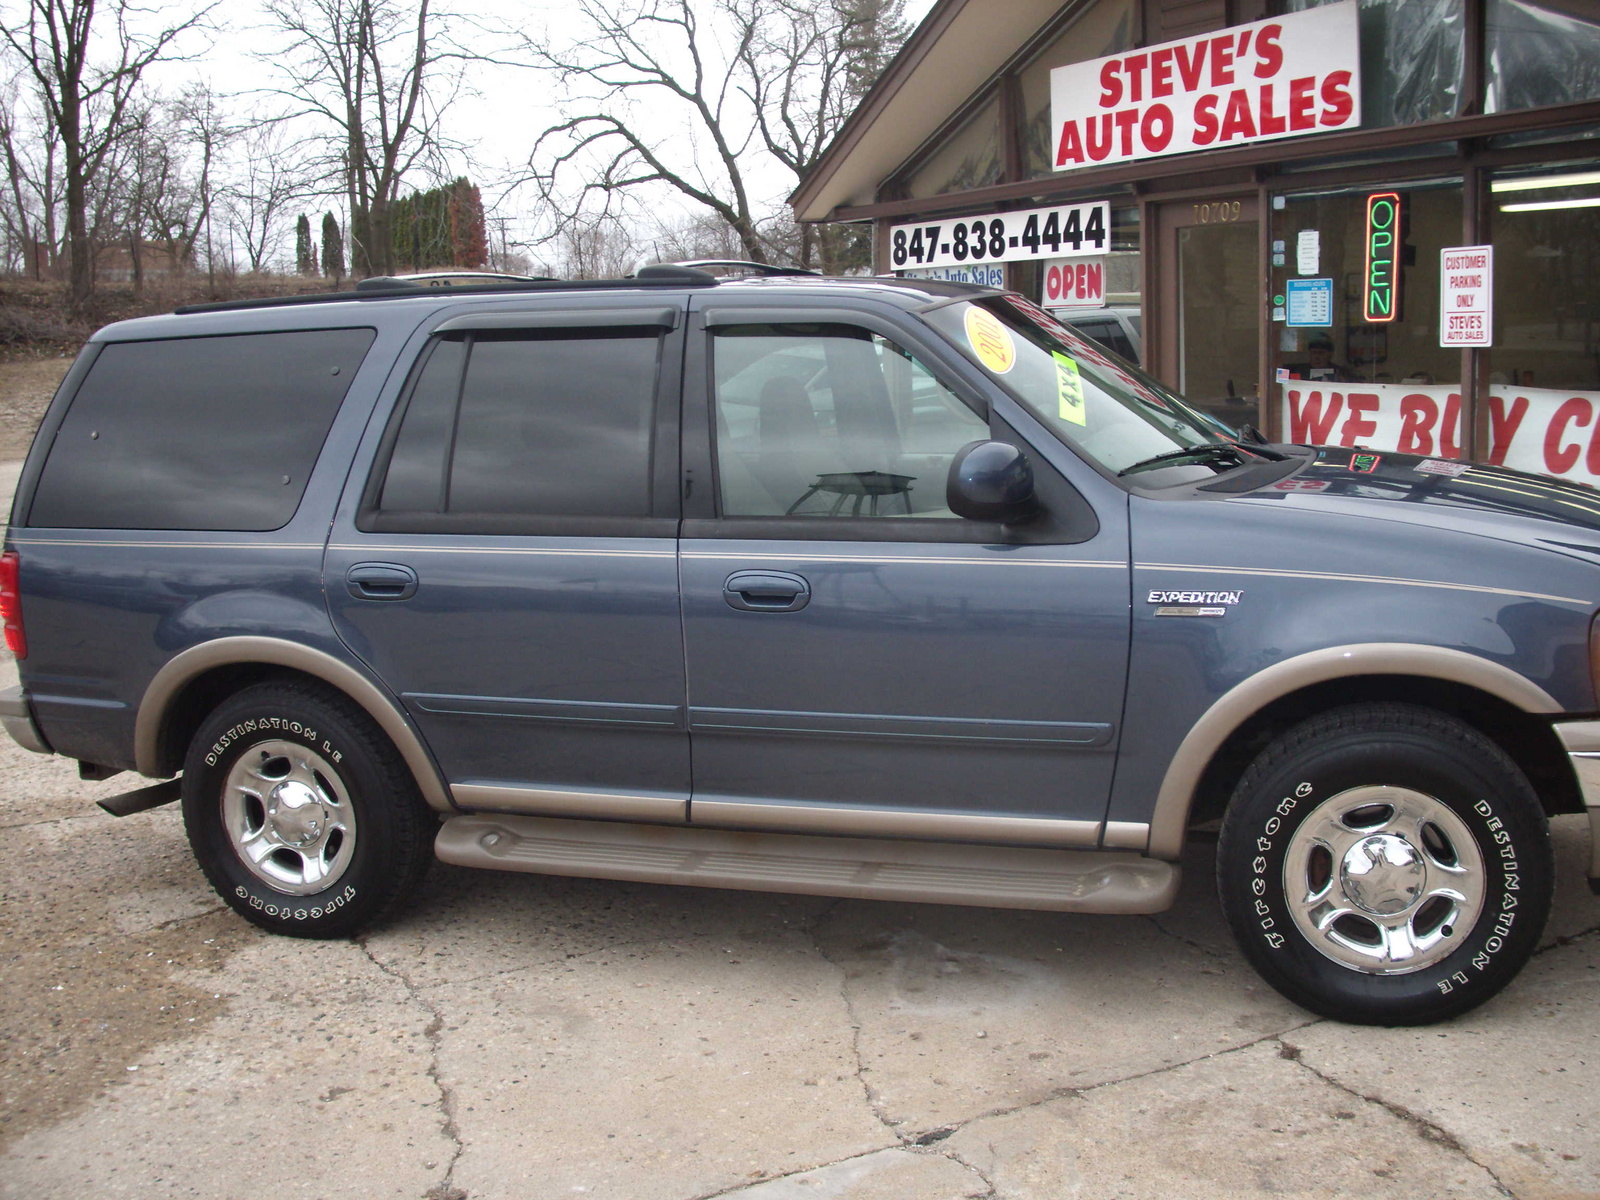 1999 Ford expedition recalls list #1